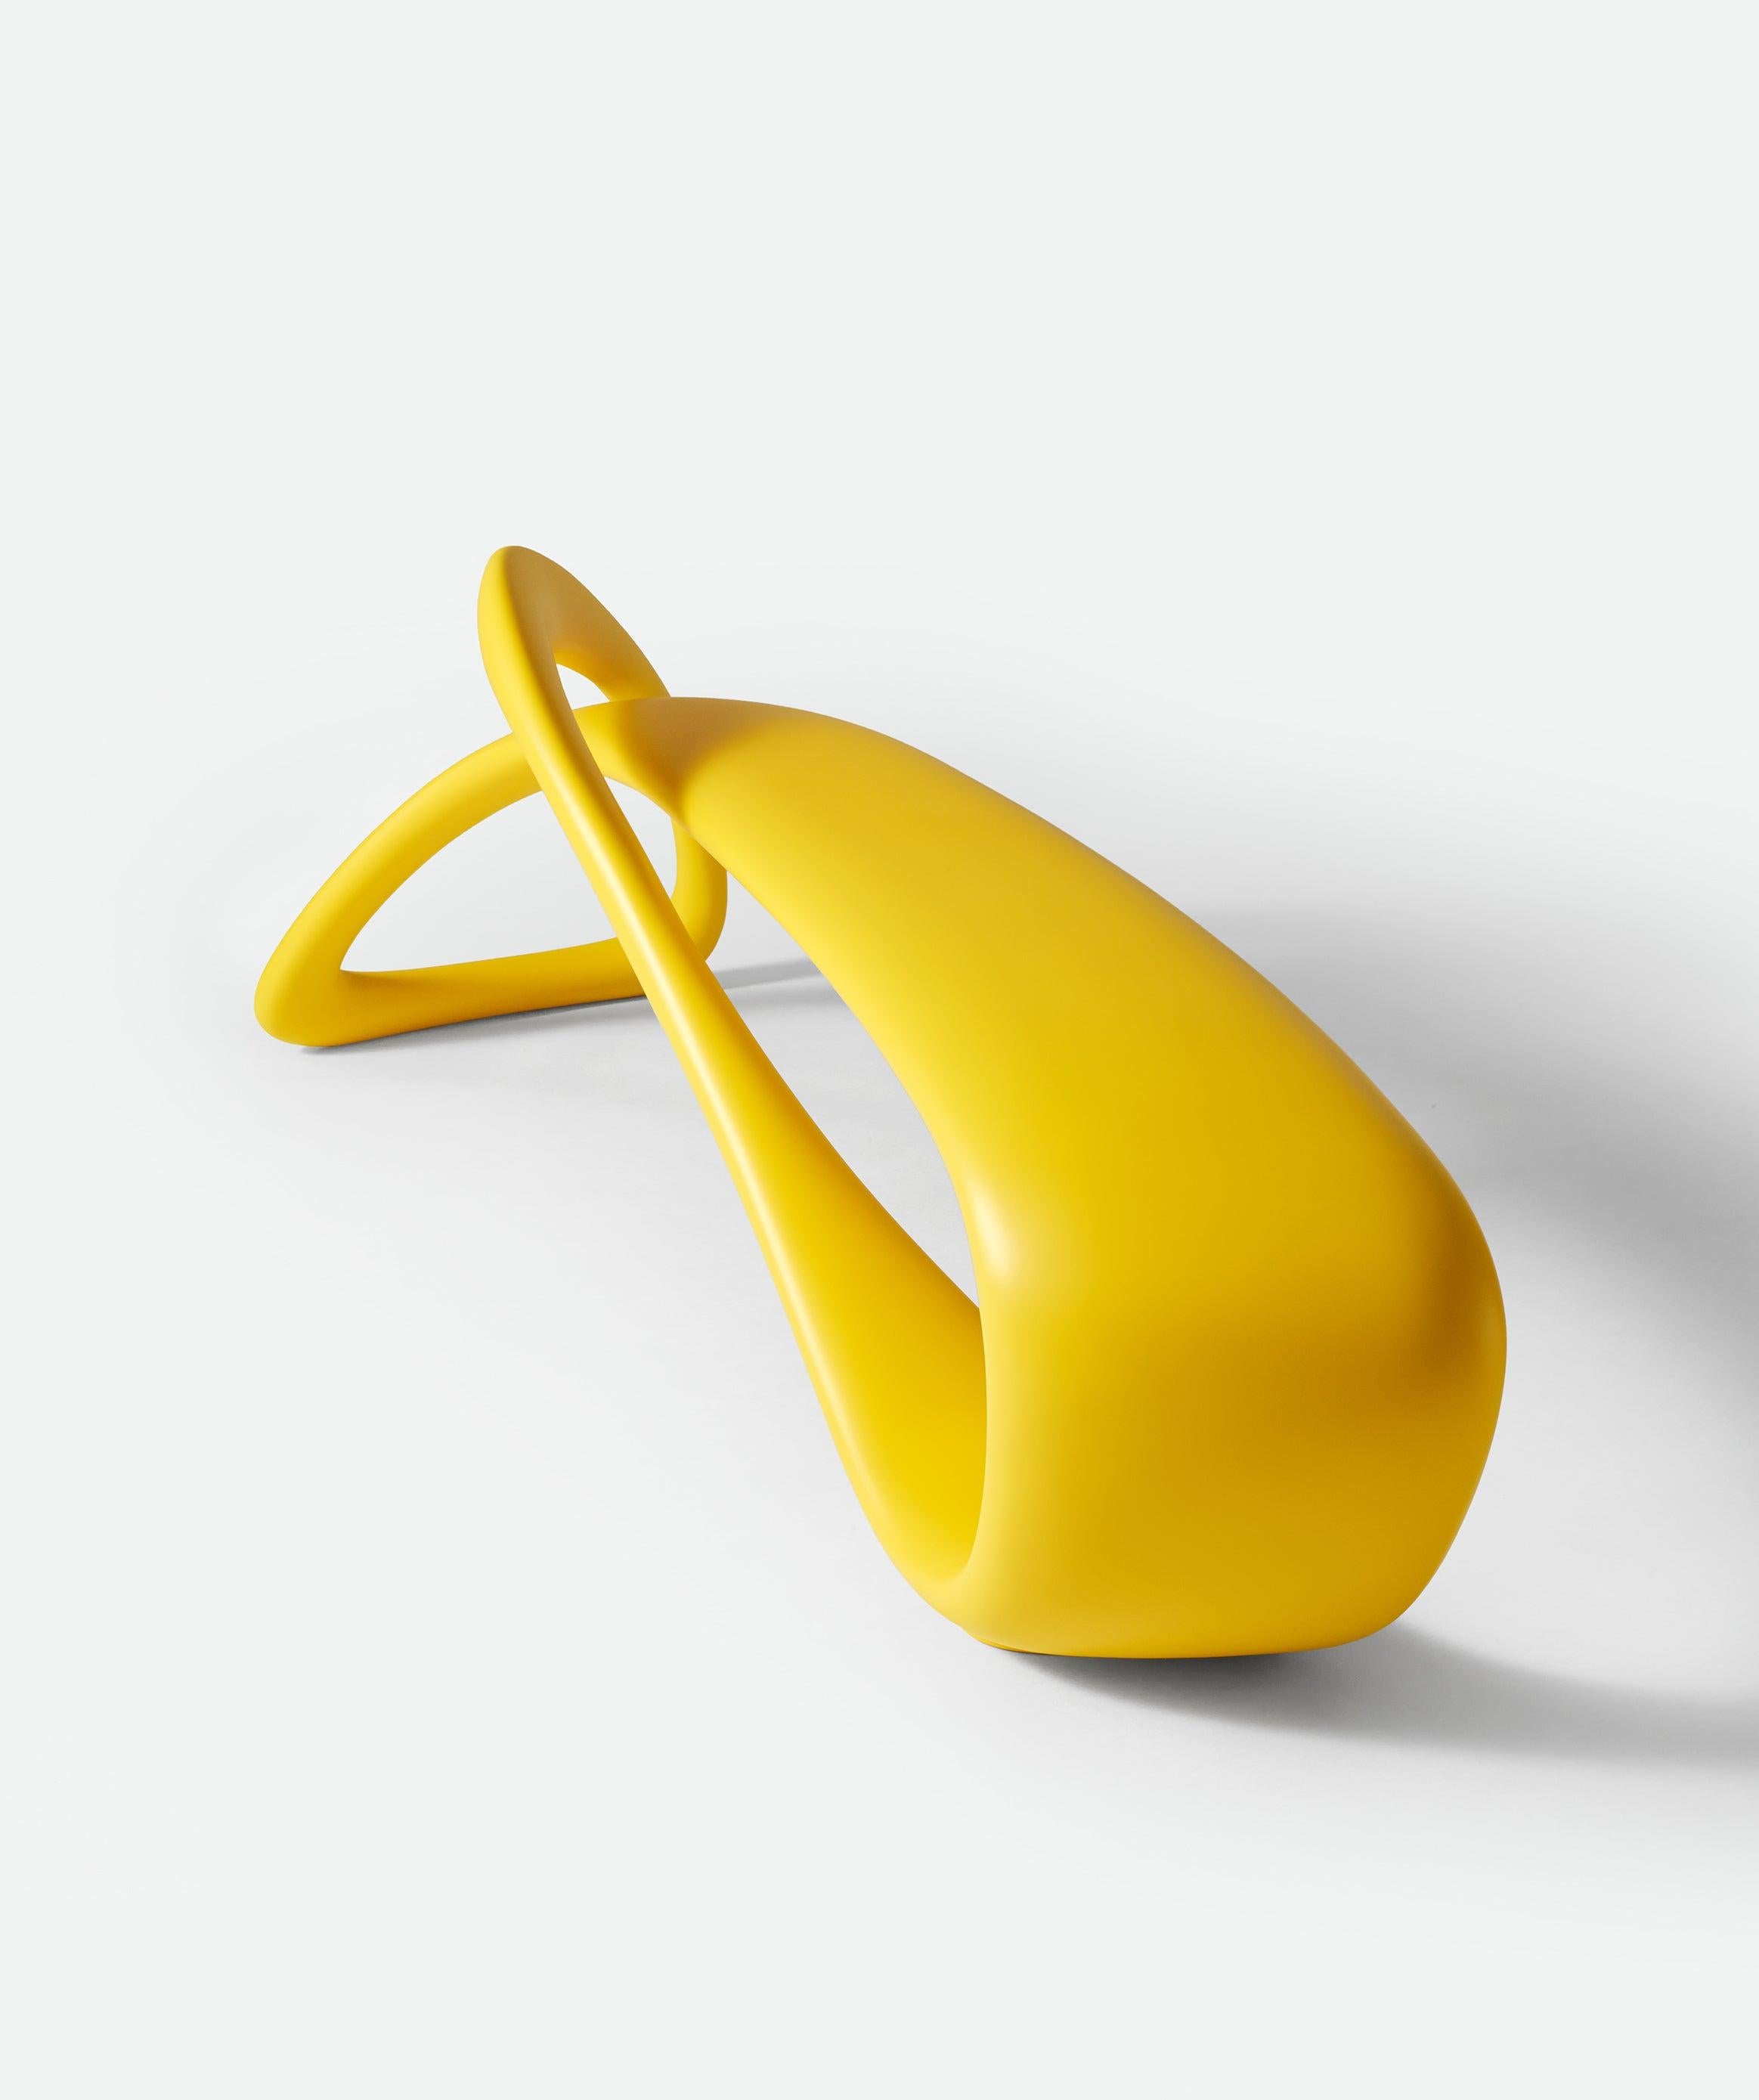 British E-Turn, Lacquered Fibreglass Sculptural Bench Seat in Yellow by Brodie Neill For Sale